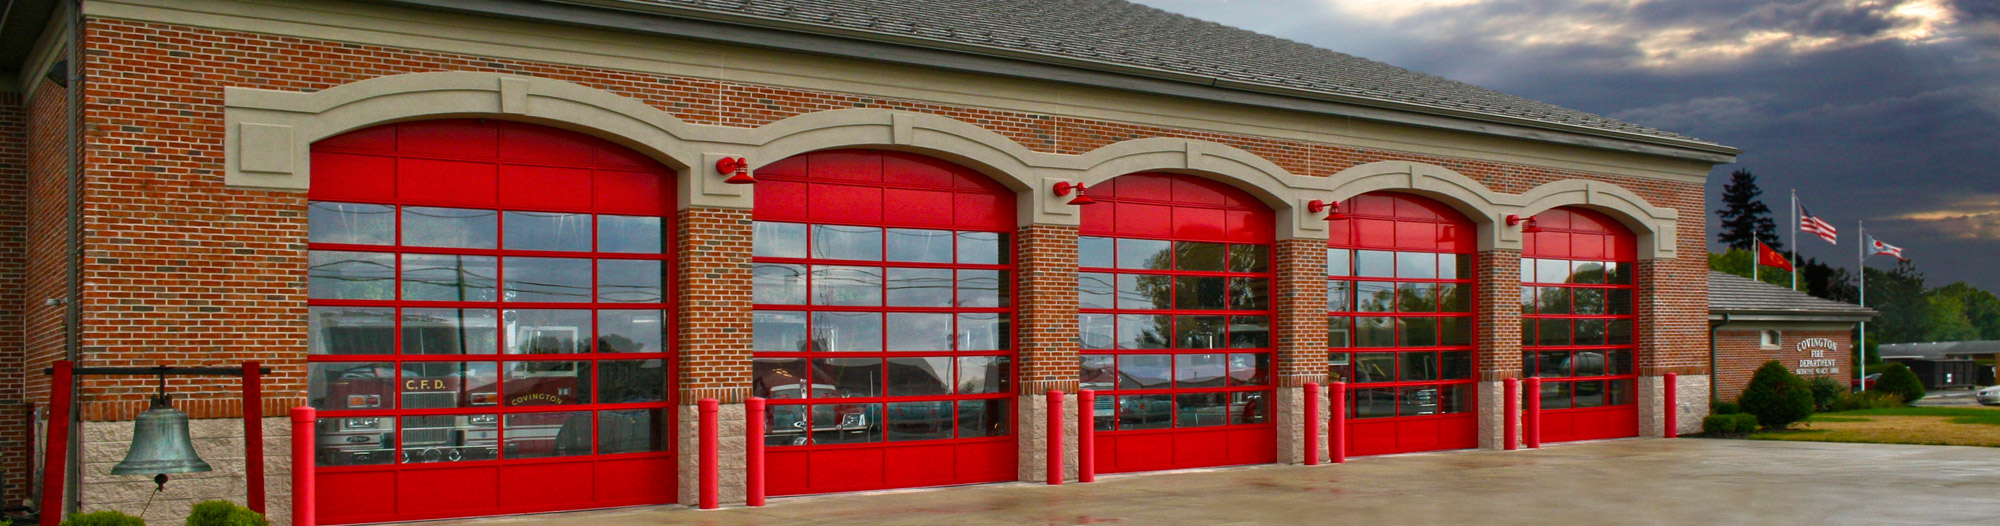 glass garage door attached to fire station